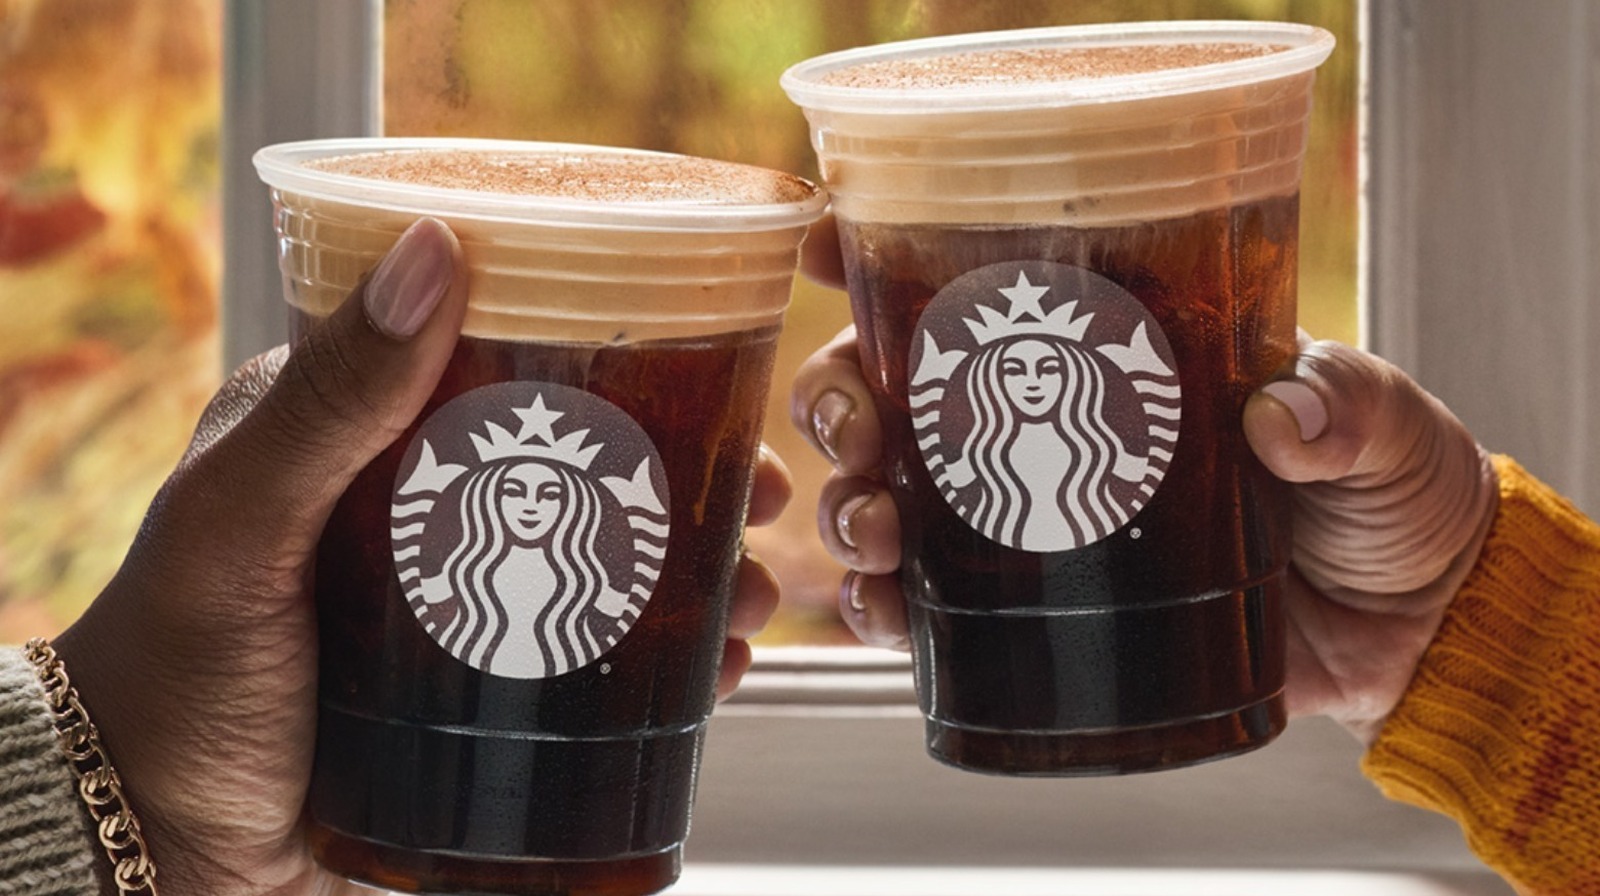 A New Deal Starbucks Just Launched Ahead Of Fall